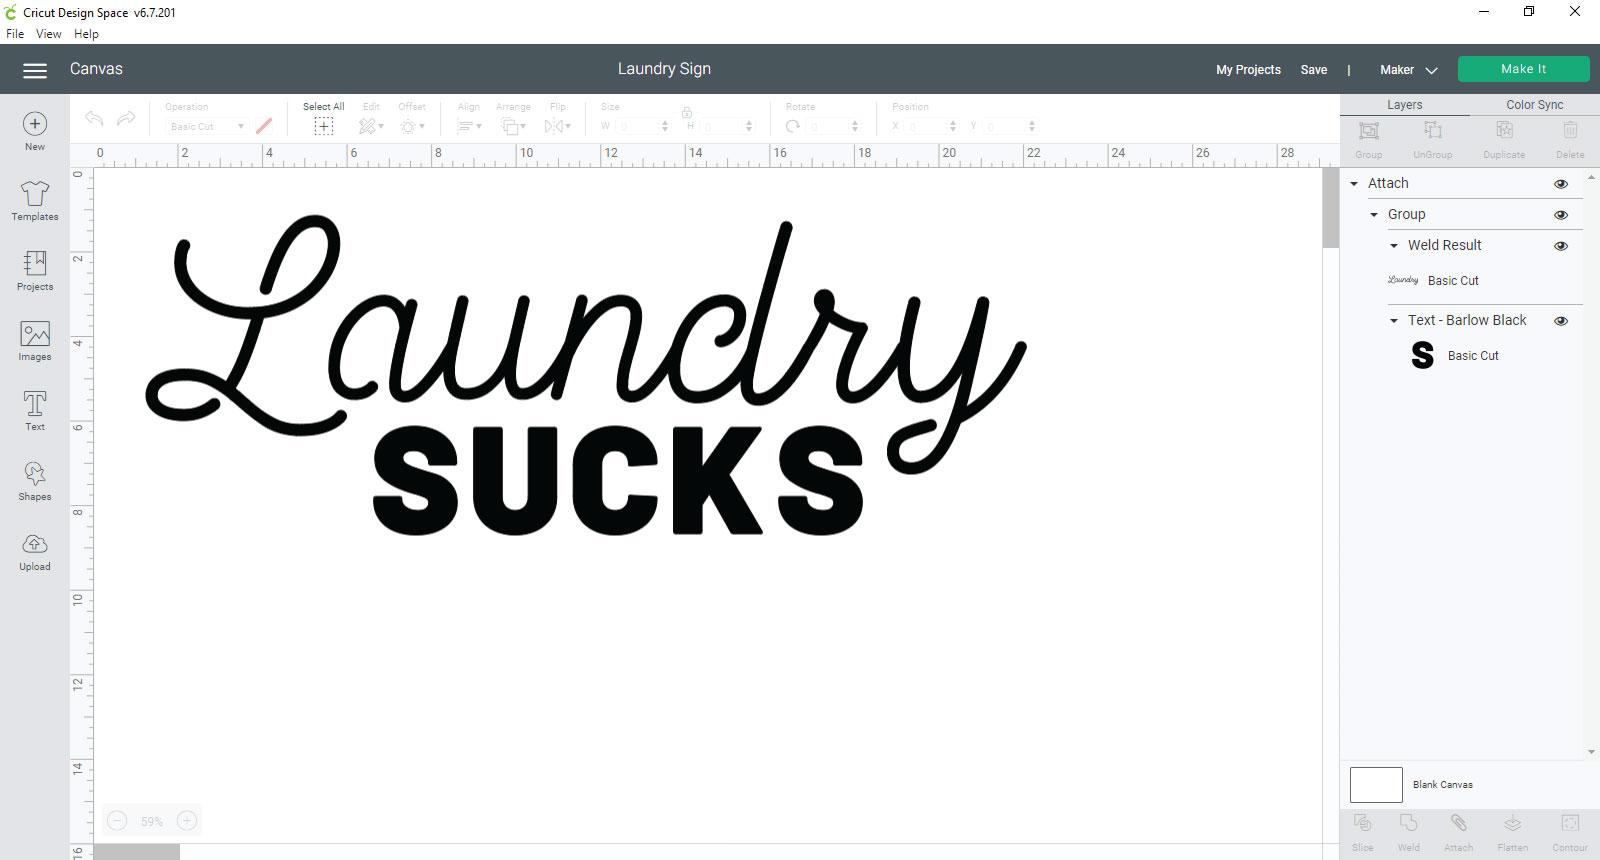 Designing a laundry sign in Cricut Design Space